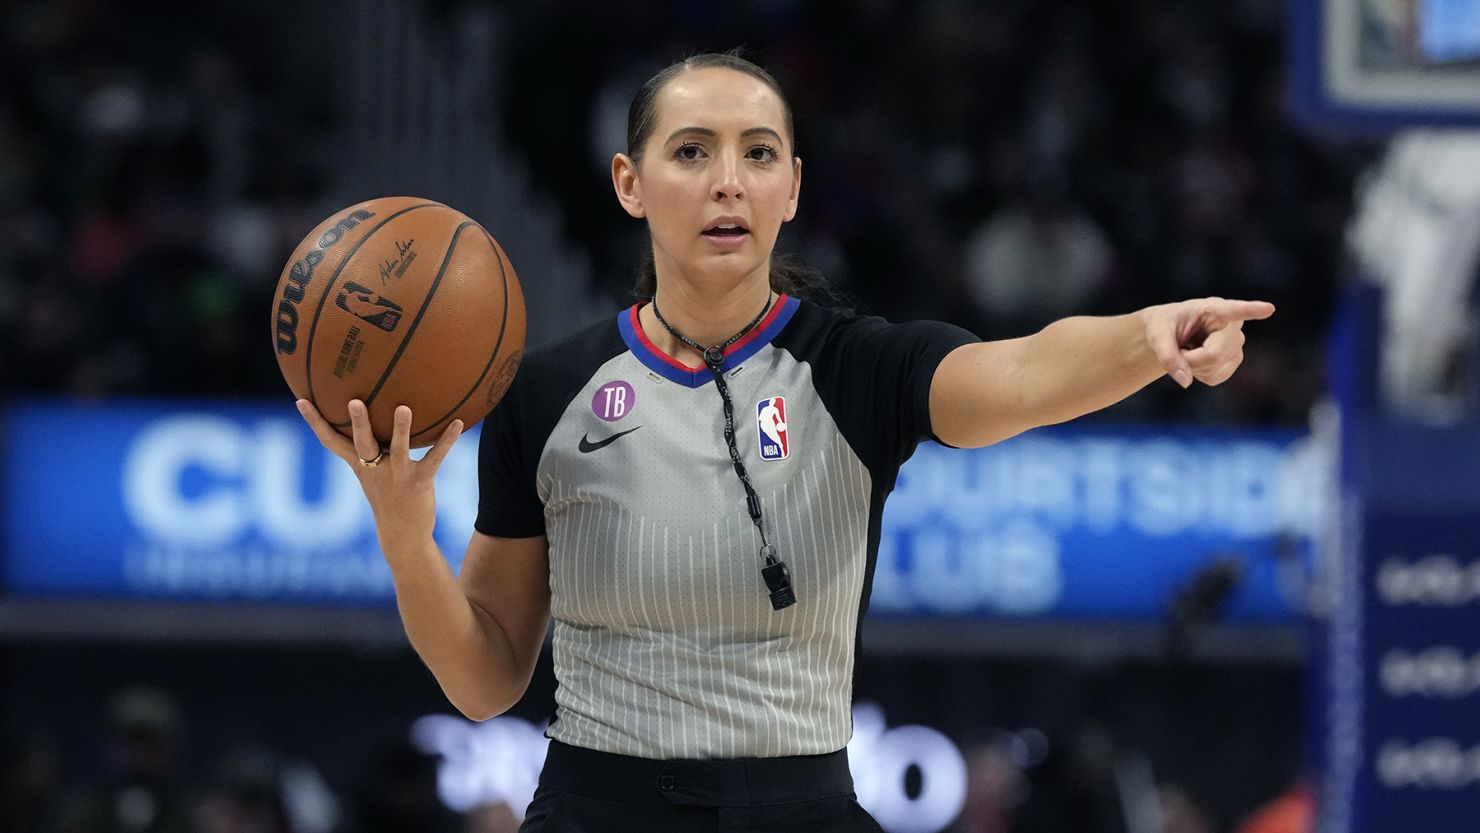 Referee Ashley Moyer-Gleich will become the first woman to call a playoff game in 12 years.